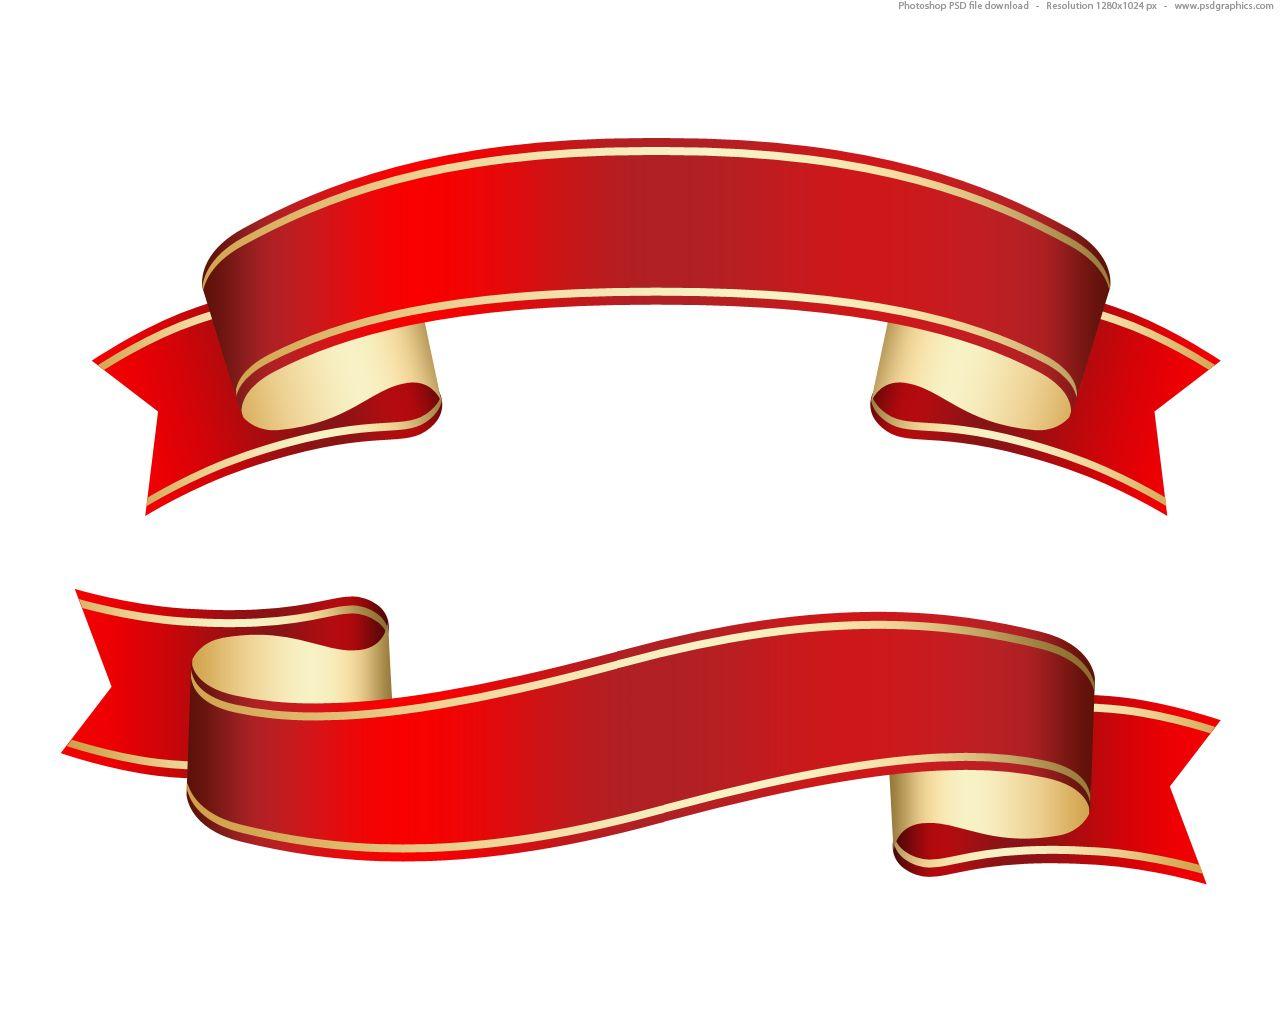 Red and Gold Ribbon Logo - red ribbon design - Kleo.wagenaardentistry.com